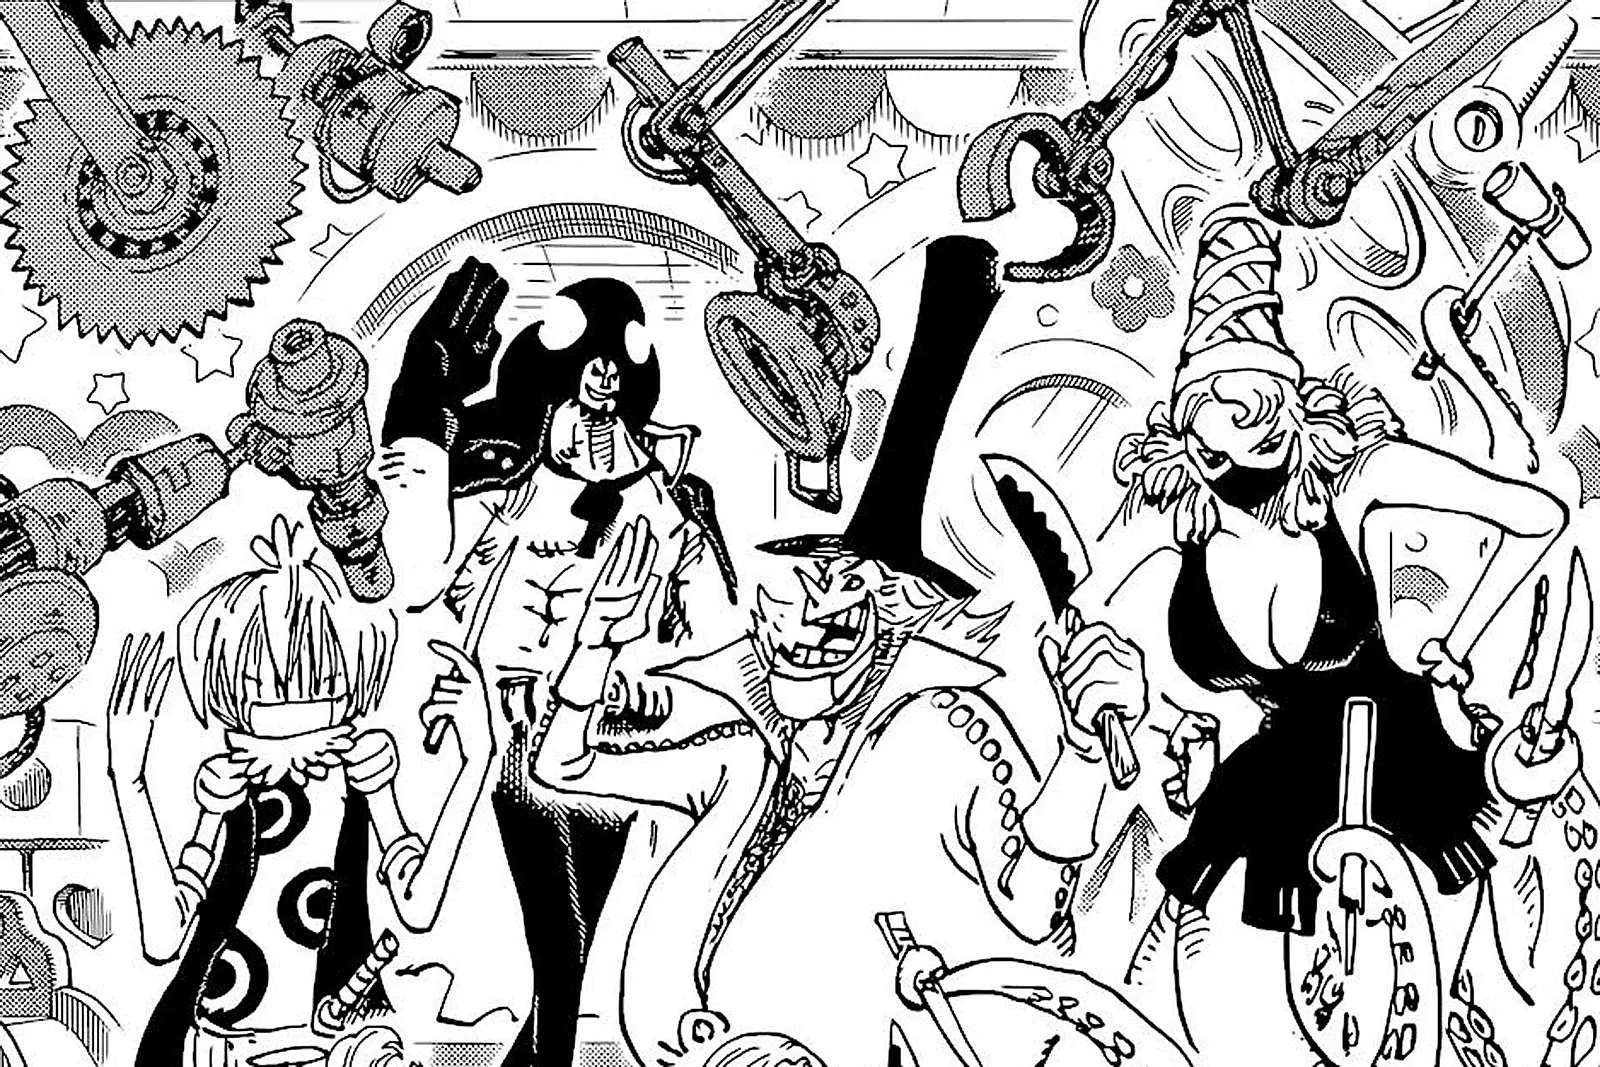 Spoilers - One Piece - 1044 Spoilers